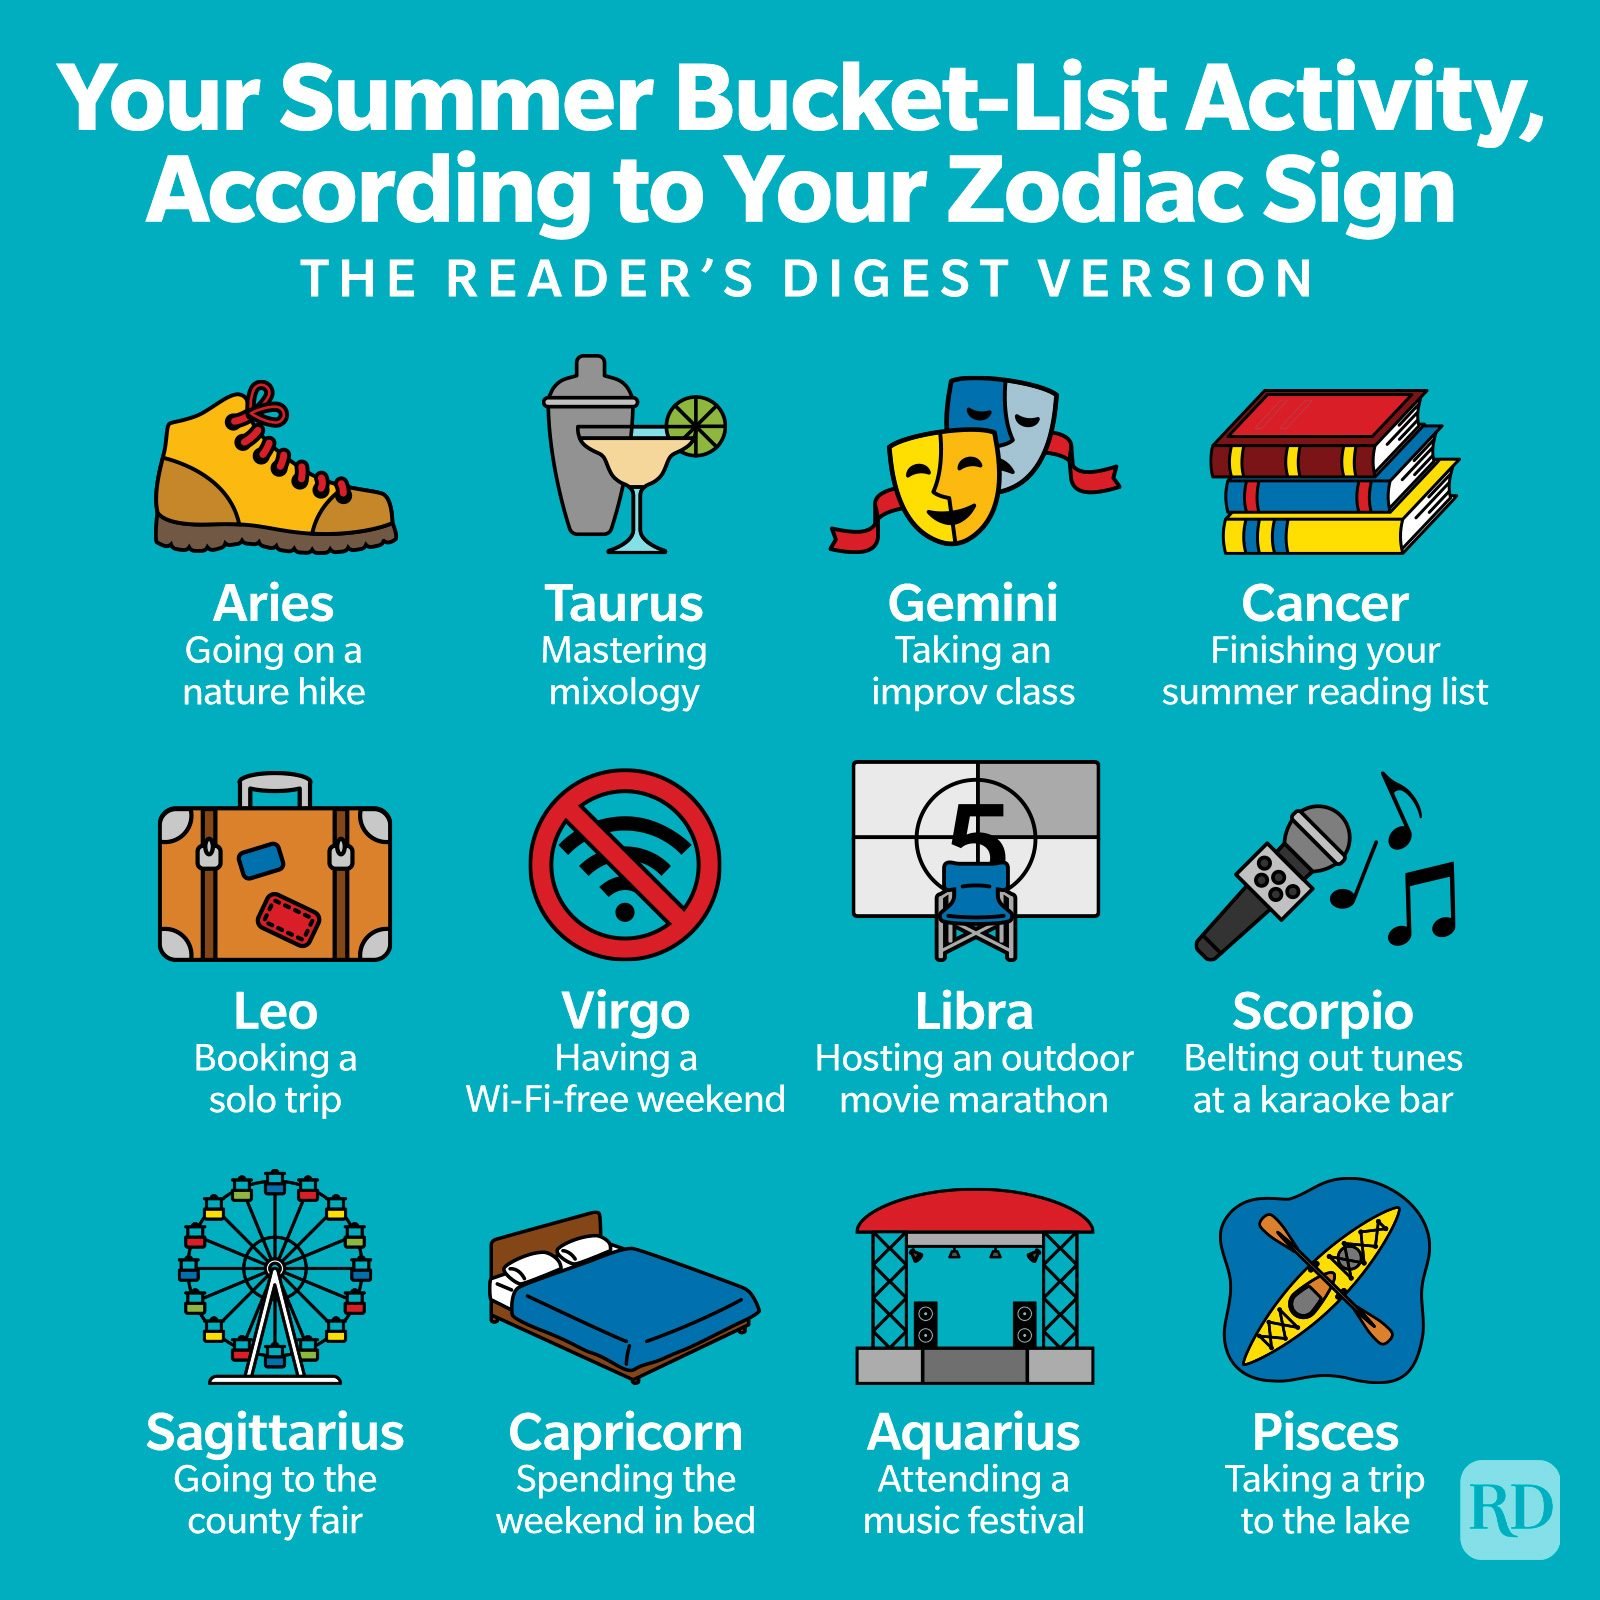 https://www.rd.com/wp-content/uploads/2023/07/Your-Summer-Bucket-List-Activity-According-to-Your-Zodiac-Sign-Infographic-GettyImages12.jpg?fit=700%2C700